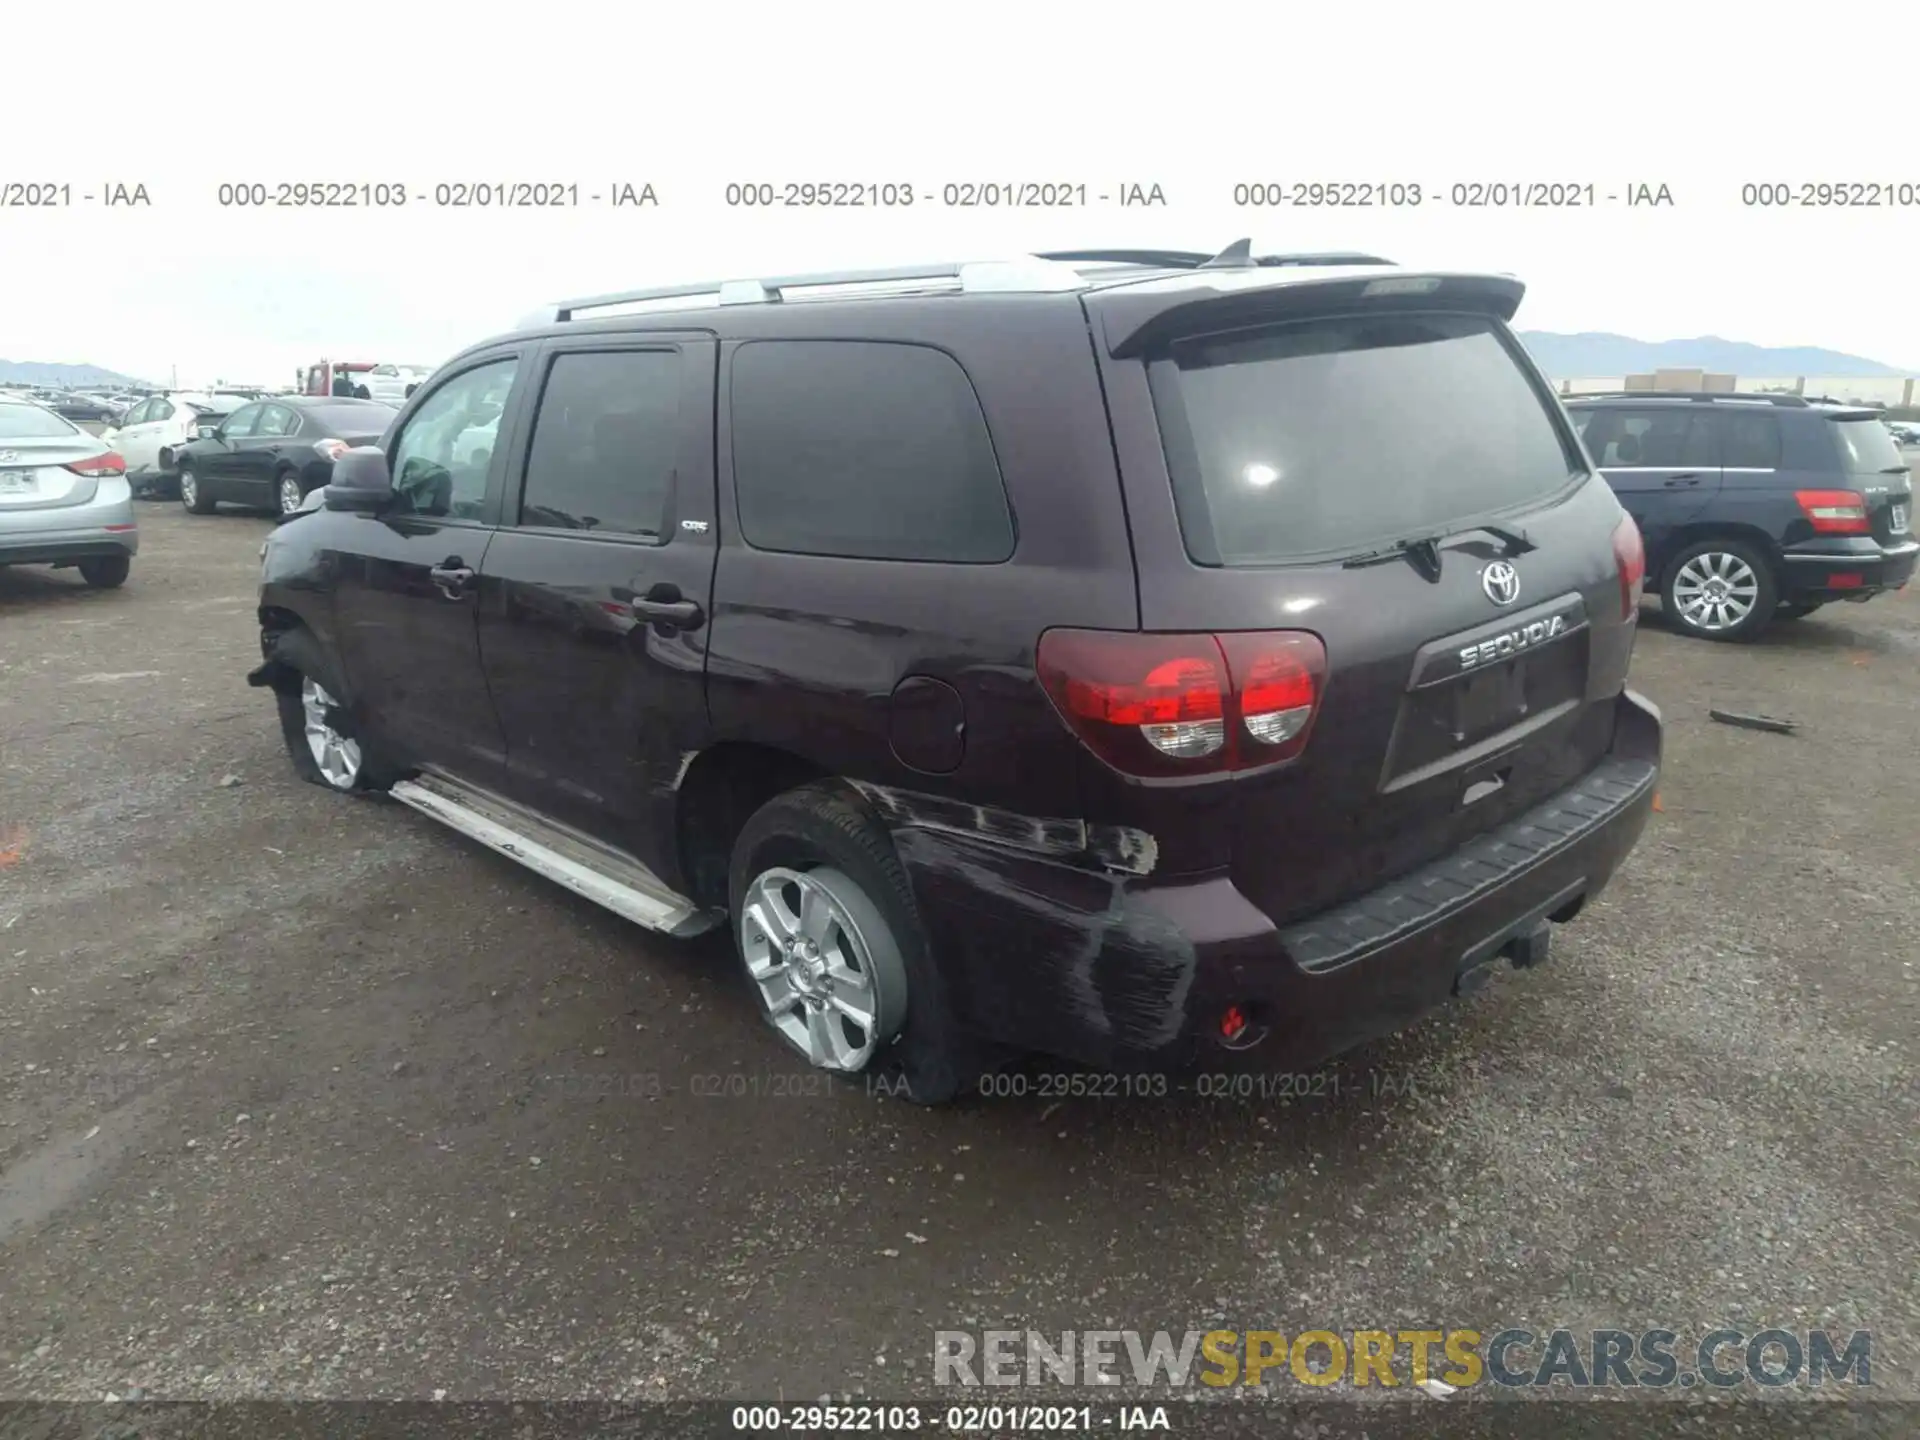 3 Photograph of a damaged car 5TDBY5G16KS173468 TOYOTA SEQUOIA 2019